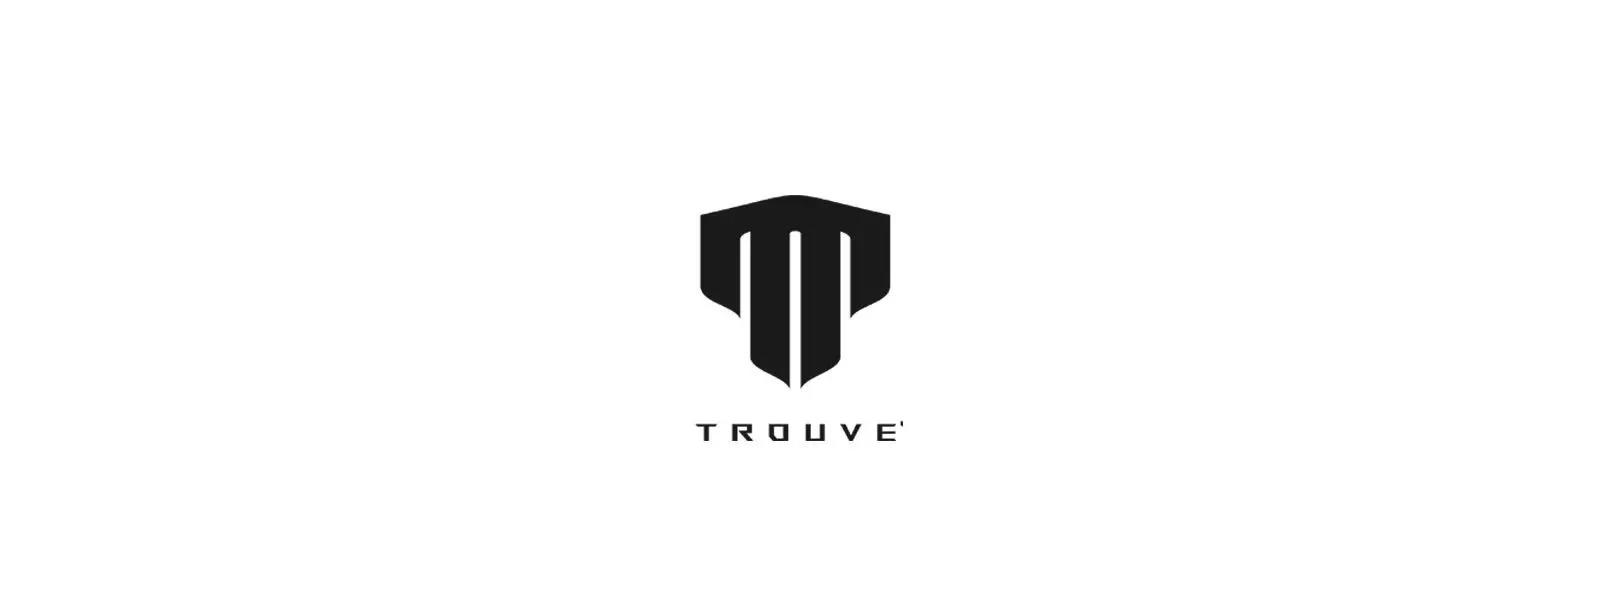 Trouve Motor incubated in FasterCapital's 'Raise Capital' program; to roll out electric motorcycle in 2023